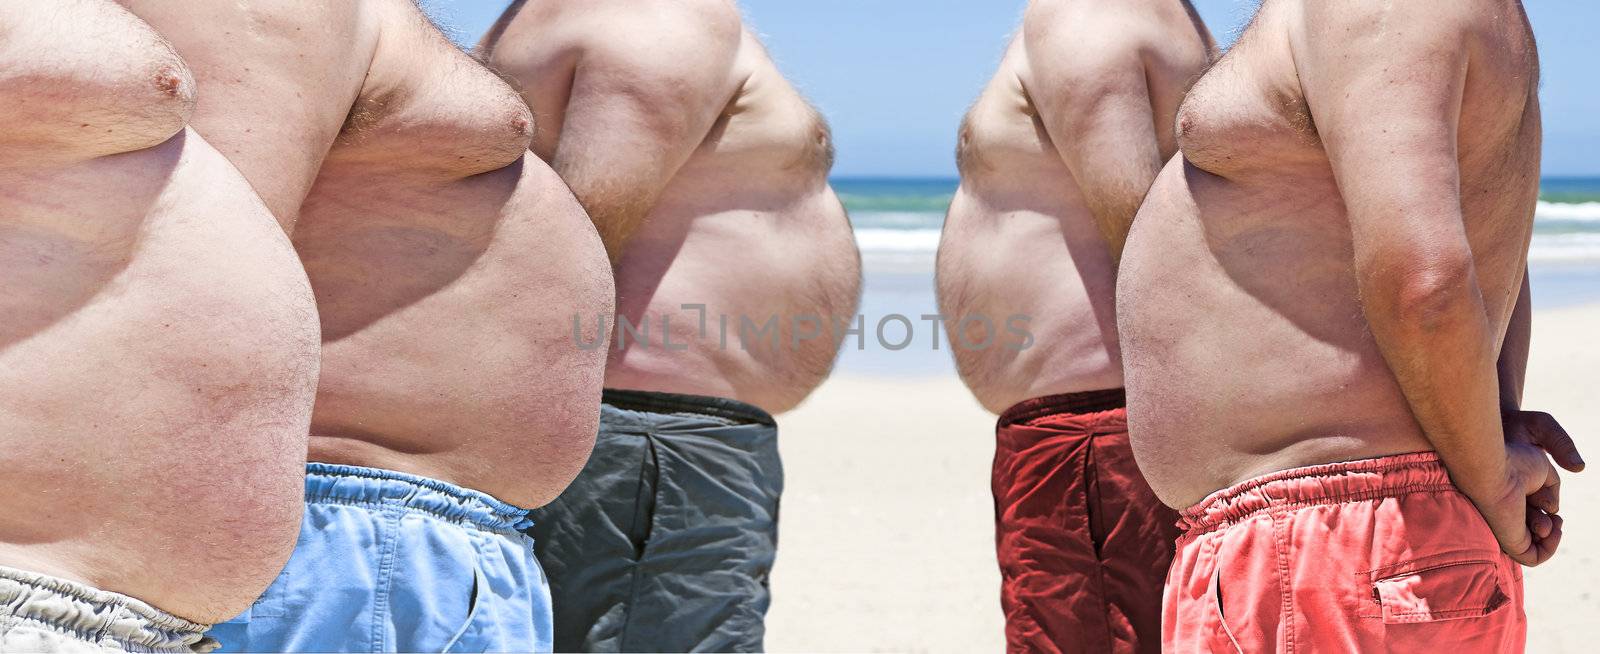 Five obesely fat men on the beach